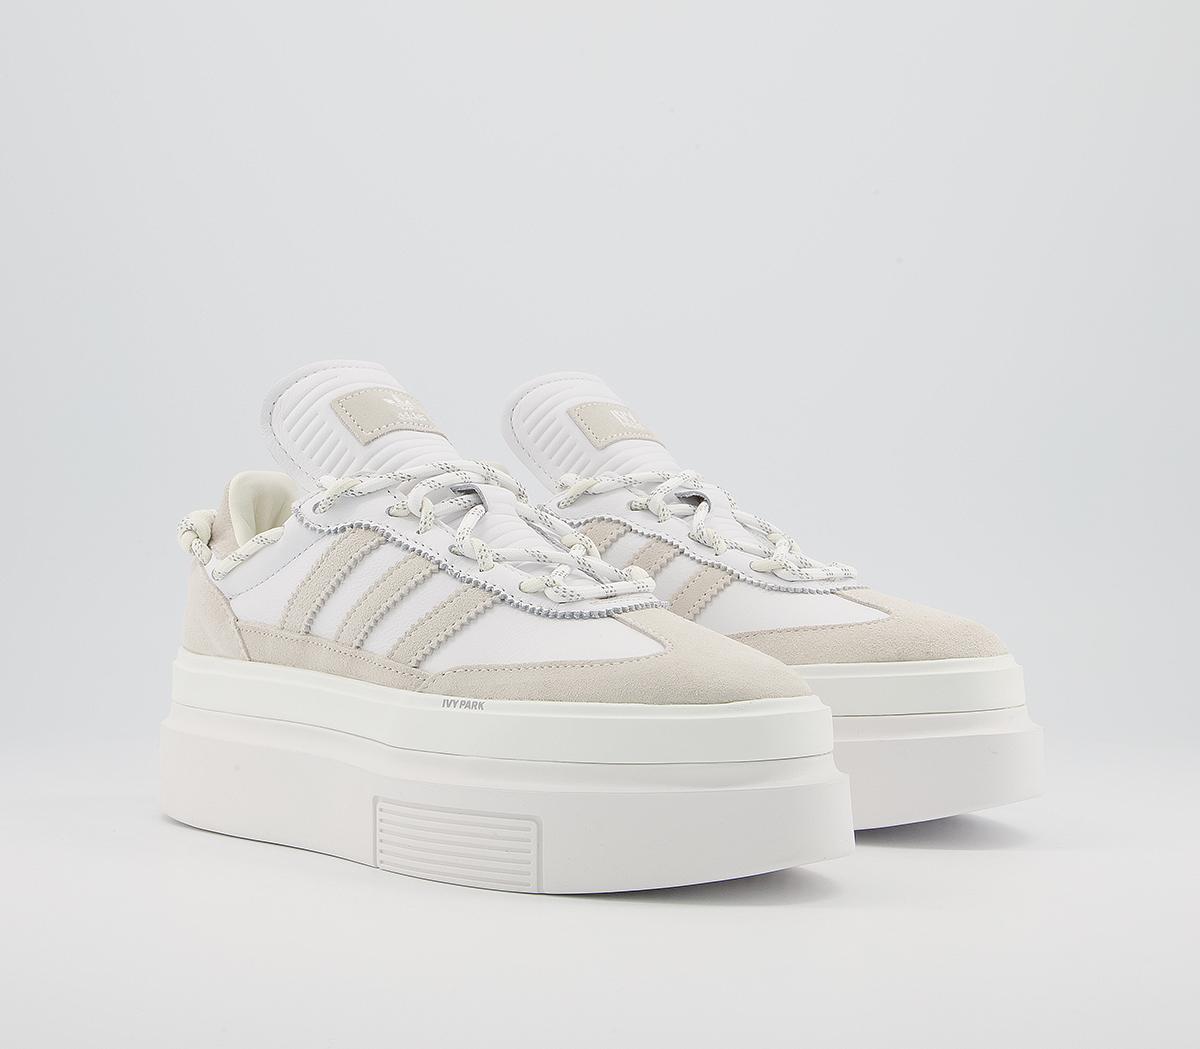 adidas Super Super Sleek 72 Trainers Ivy Park Skiyonce - Women's Trainers